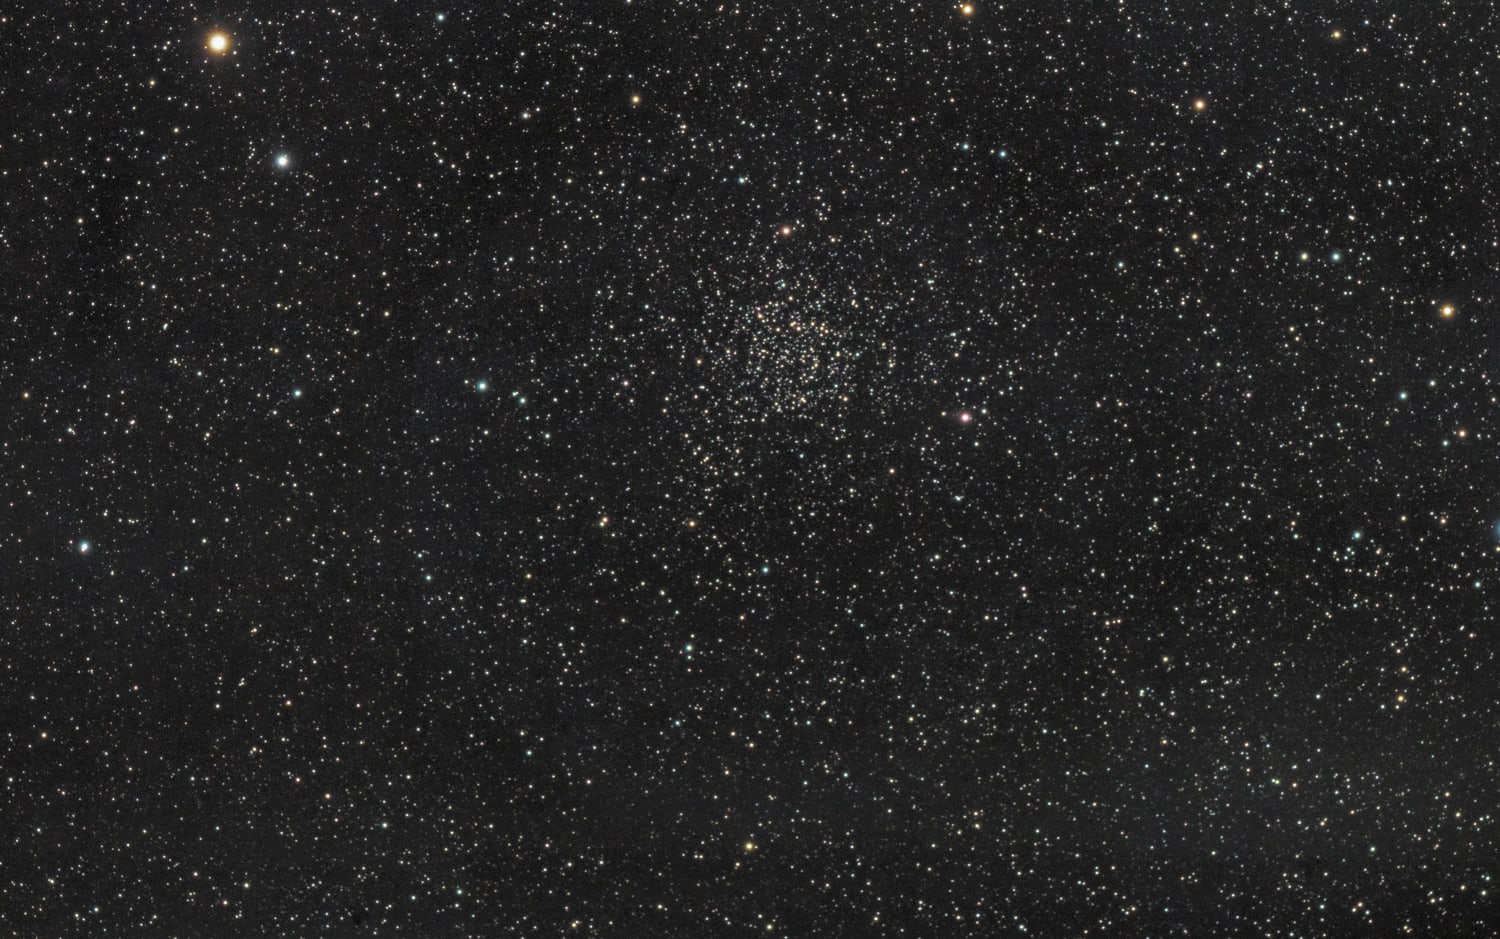 A picture I took of NGC 7789, a star cluster discovered by Caroline Herschel in 1783. It contains at least 5,000 stars and is over 50 light-years wide!